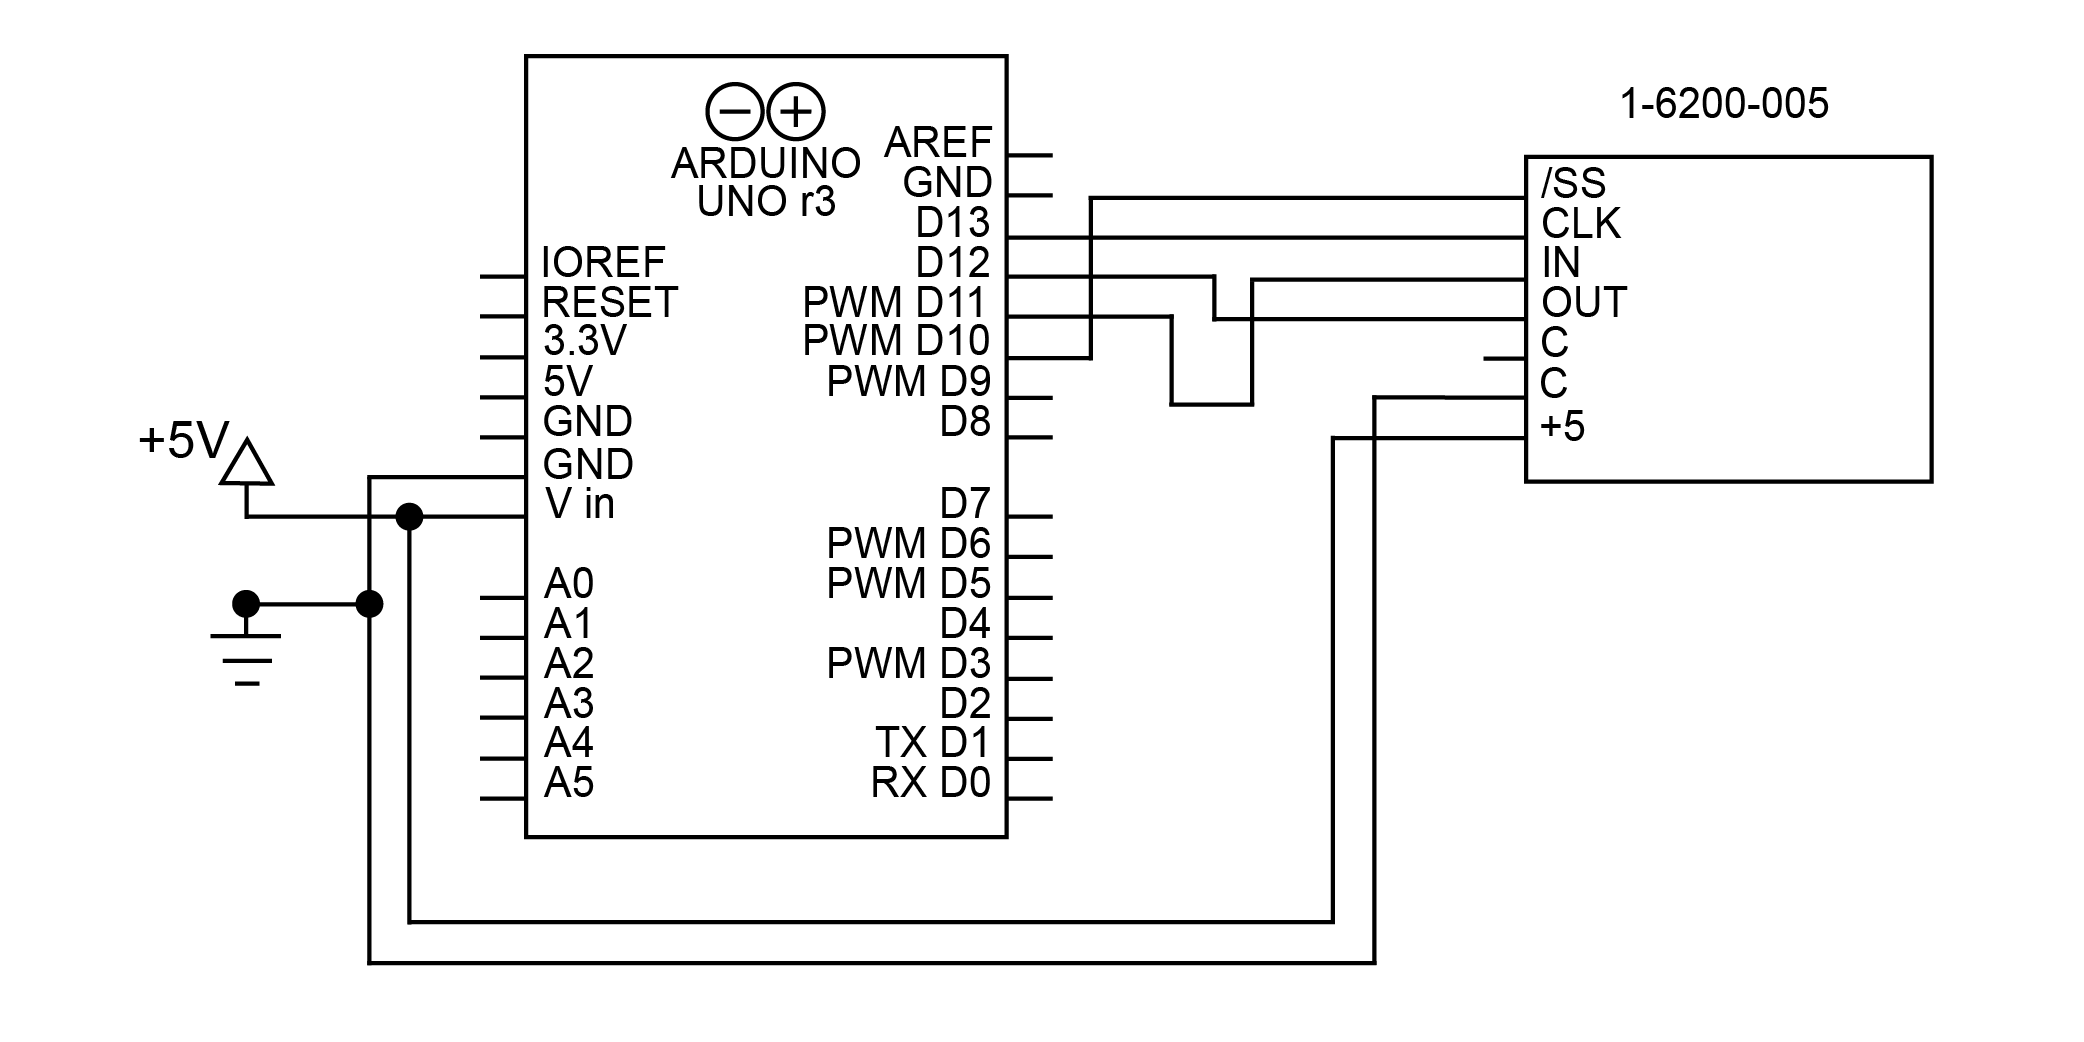 Wiring Schematic for the 1-6200-005 SPI signal conditioners with an Arduino Uno